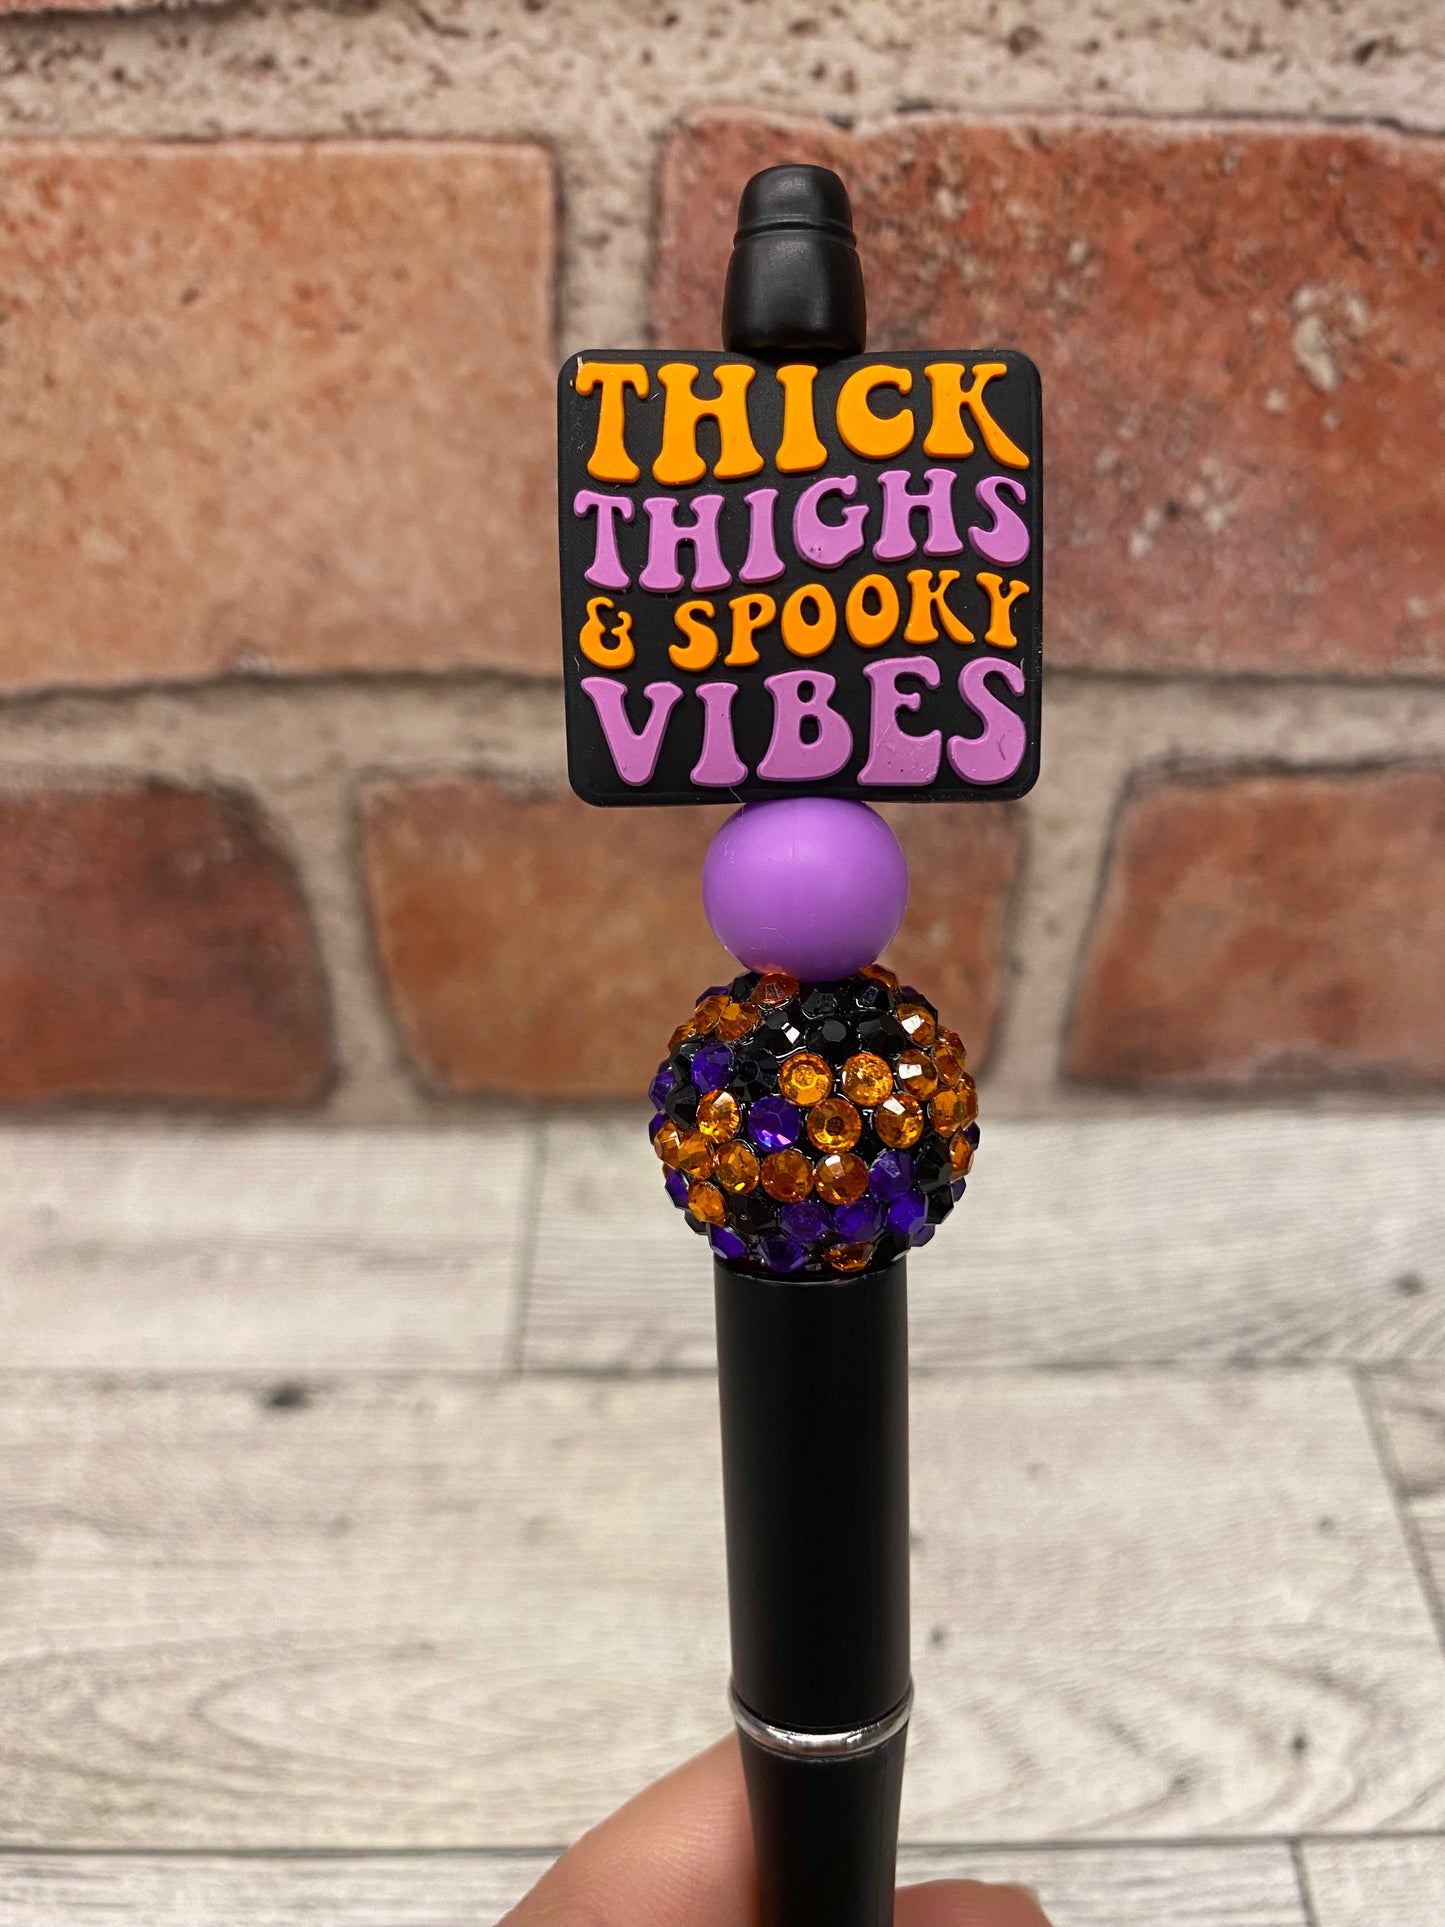 Spooky Vibes Thick Thighs silicone beaded ballpoint ink pen